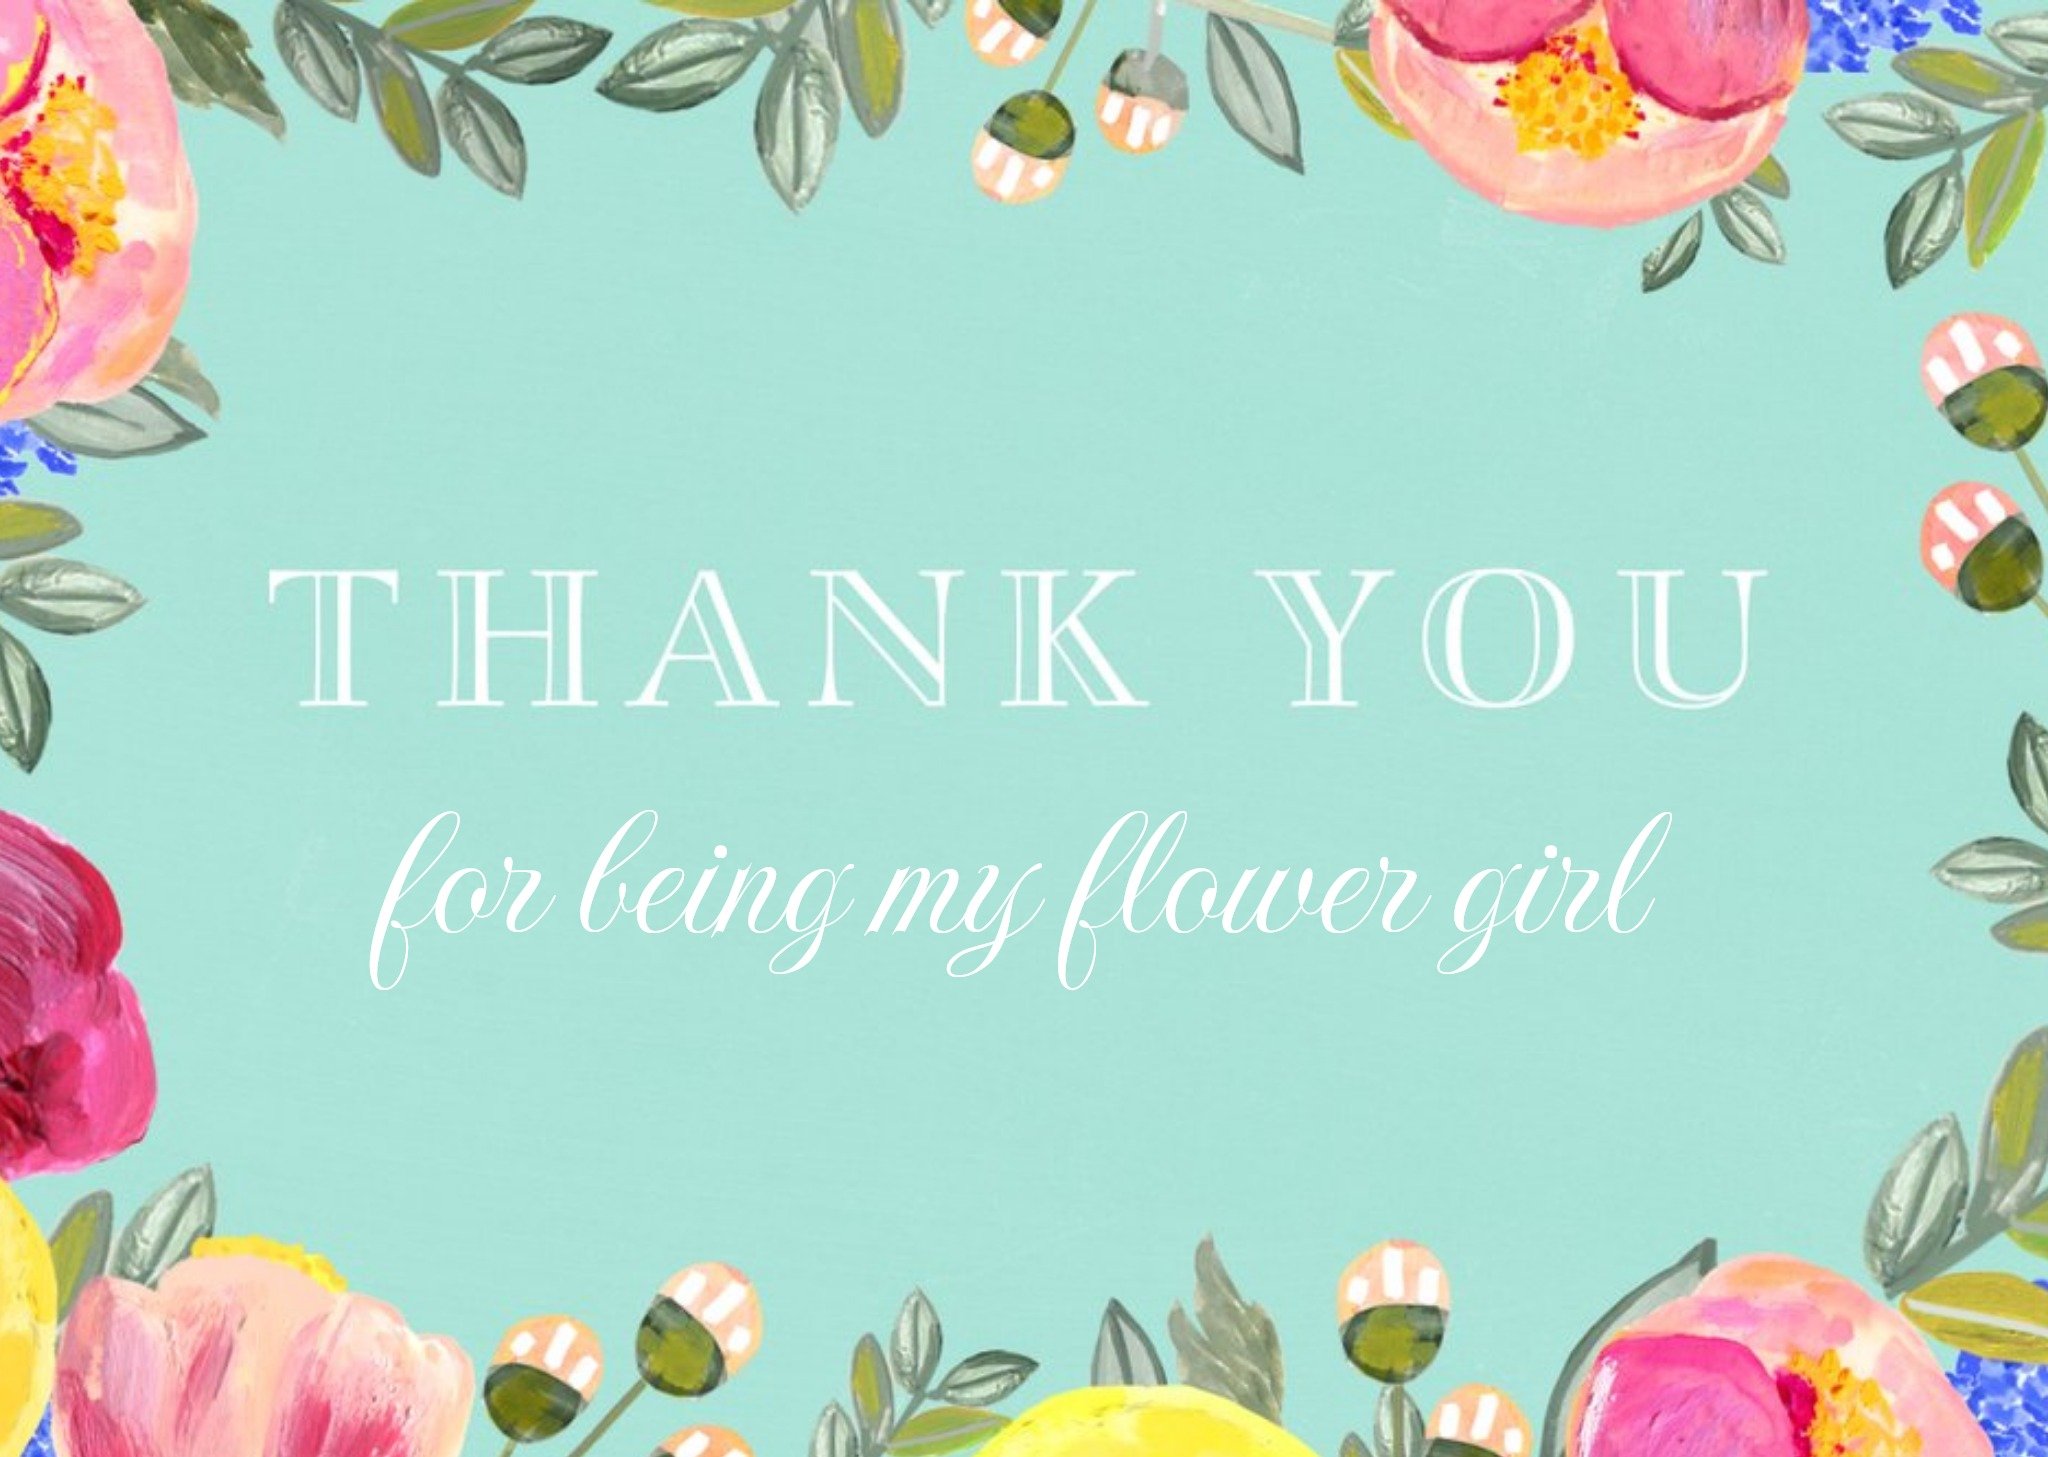 Moonpig Botanic Border Personalised Thank You For Being My Flower Girl Card, Large